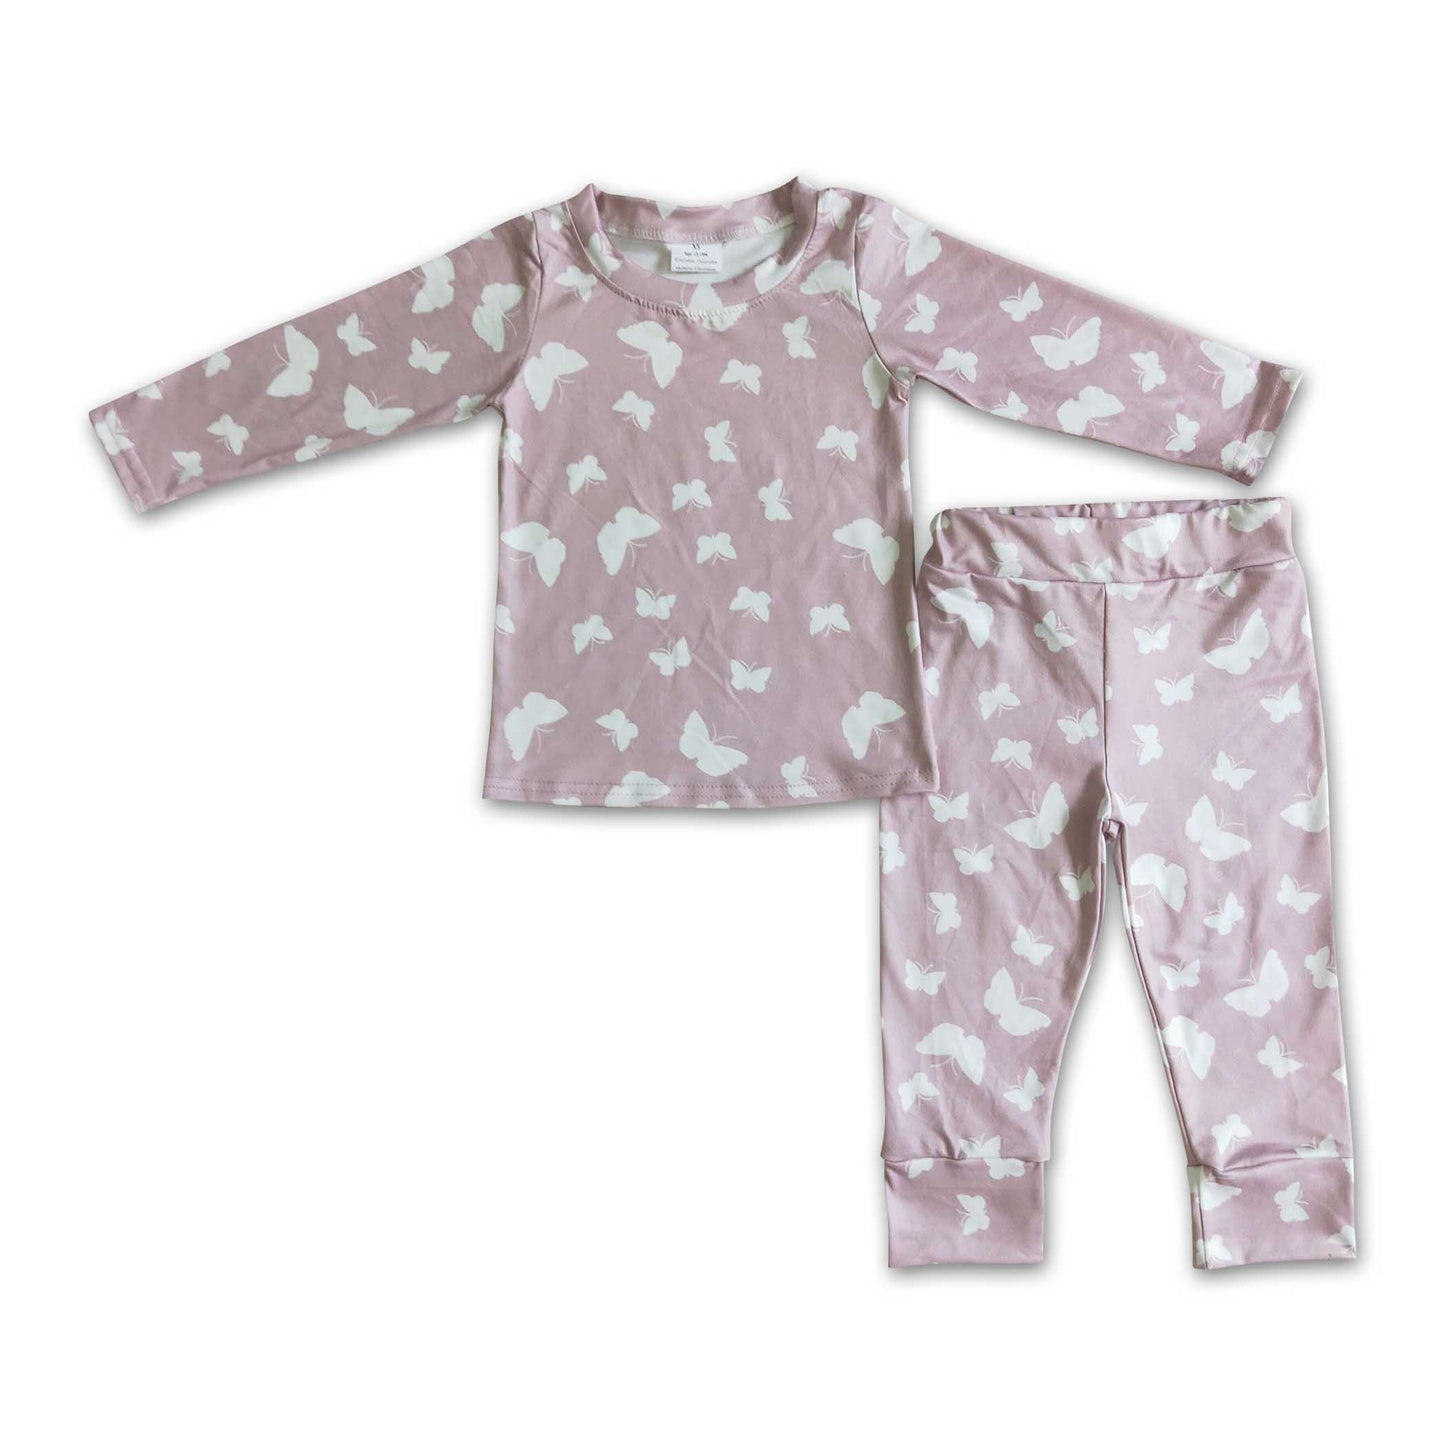 Butterfly long sleeves baby girls fall pajamas